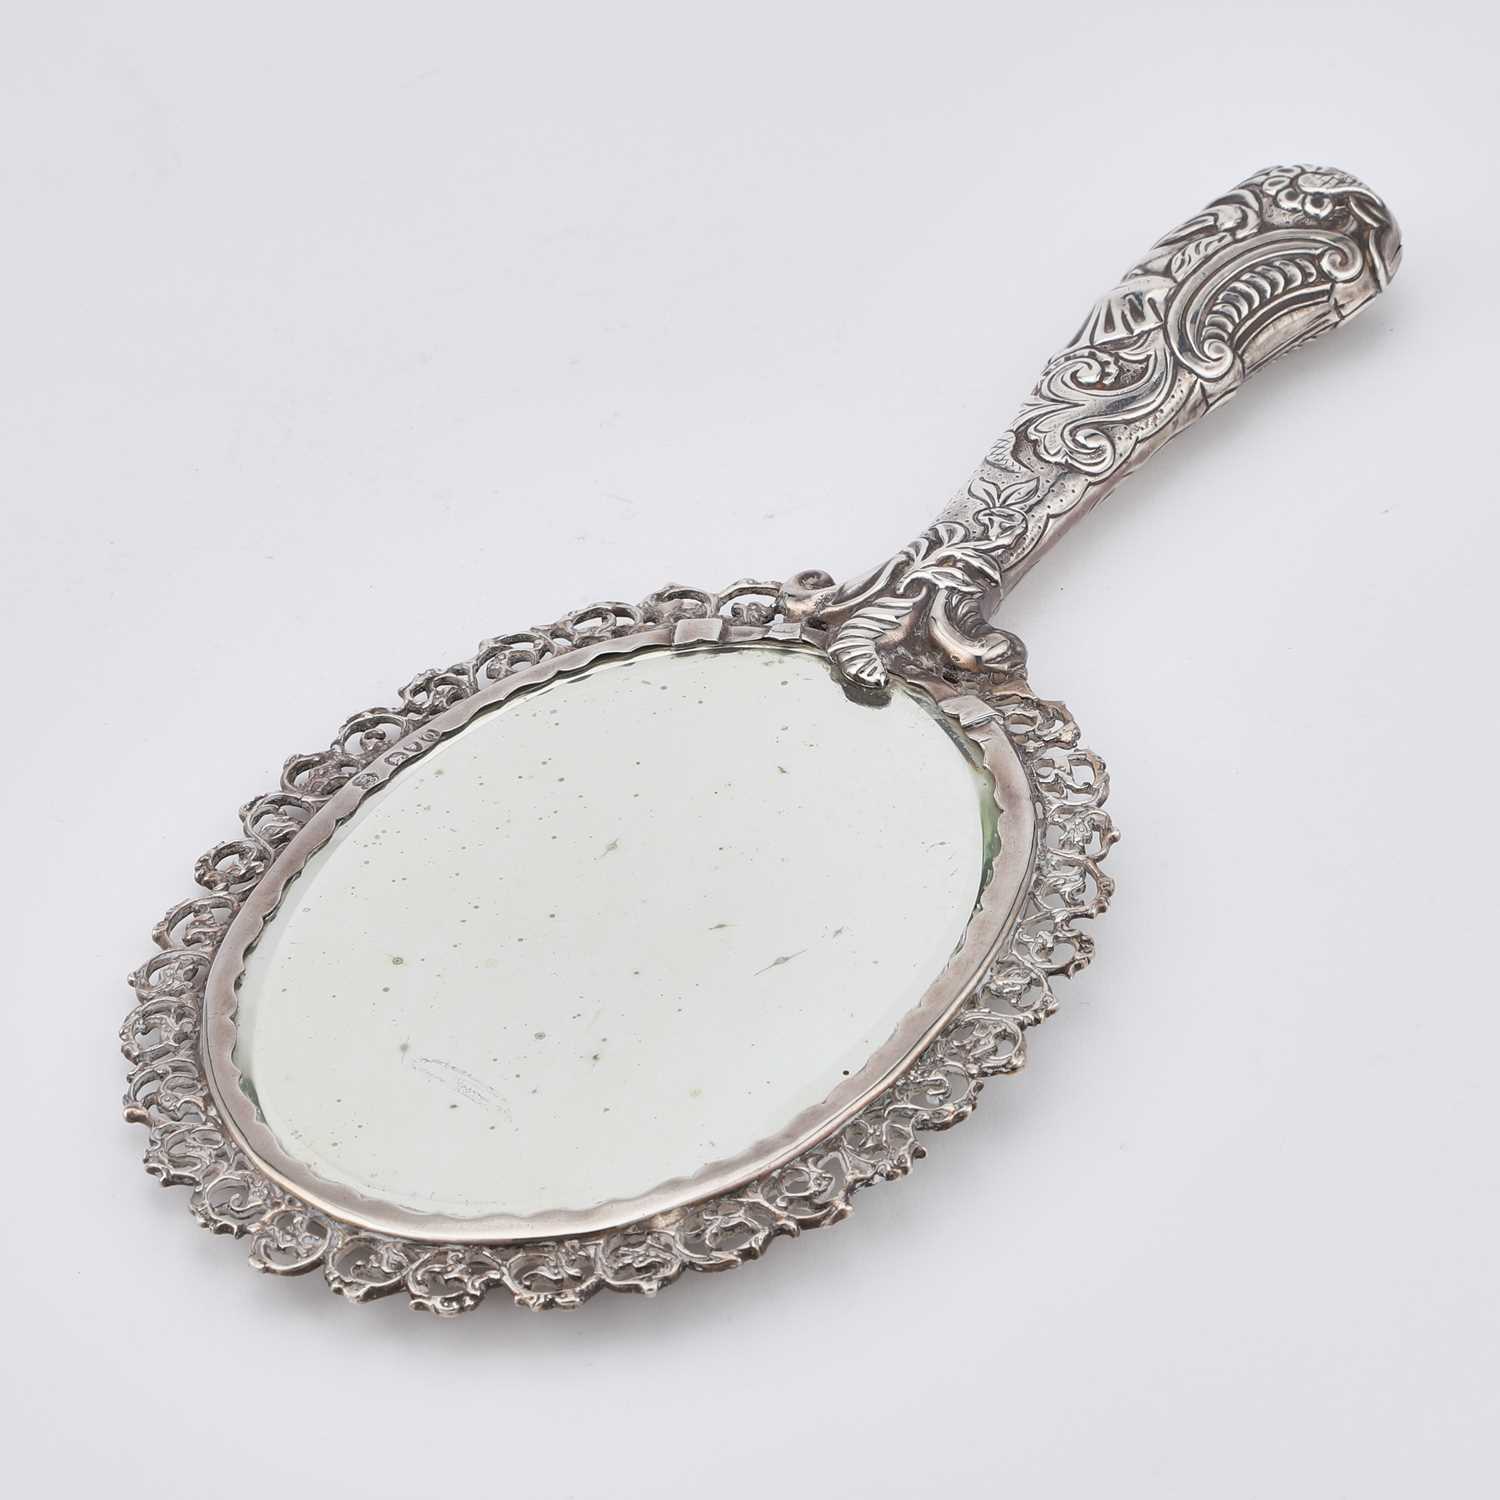 A VICTORIAN SILVER HAND-MIRROR - Image 2 of 2